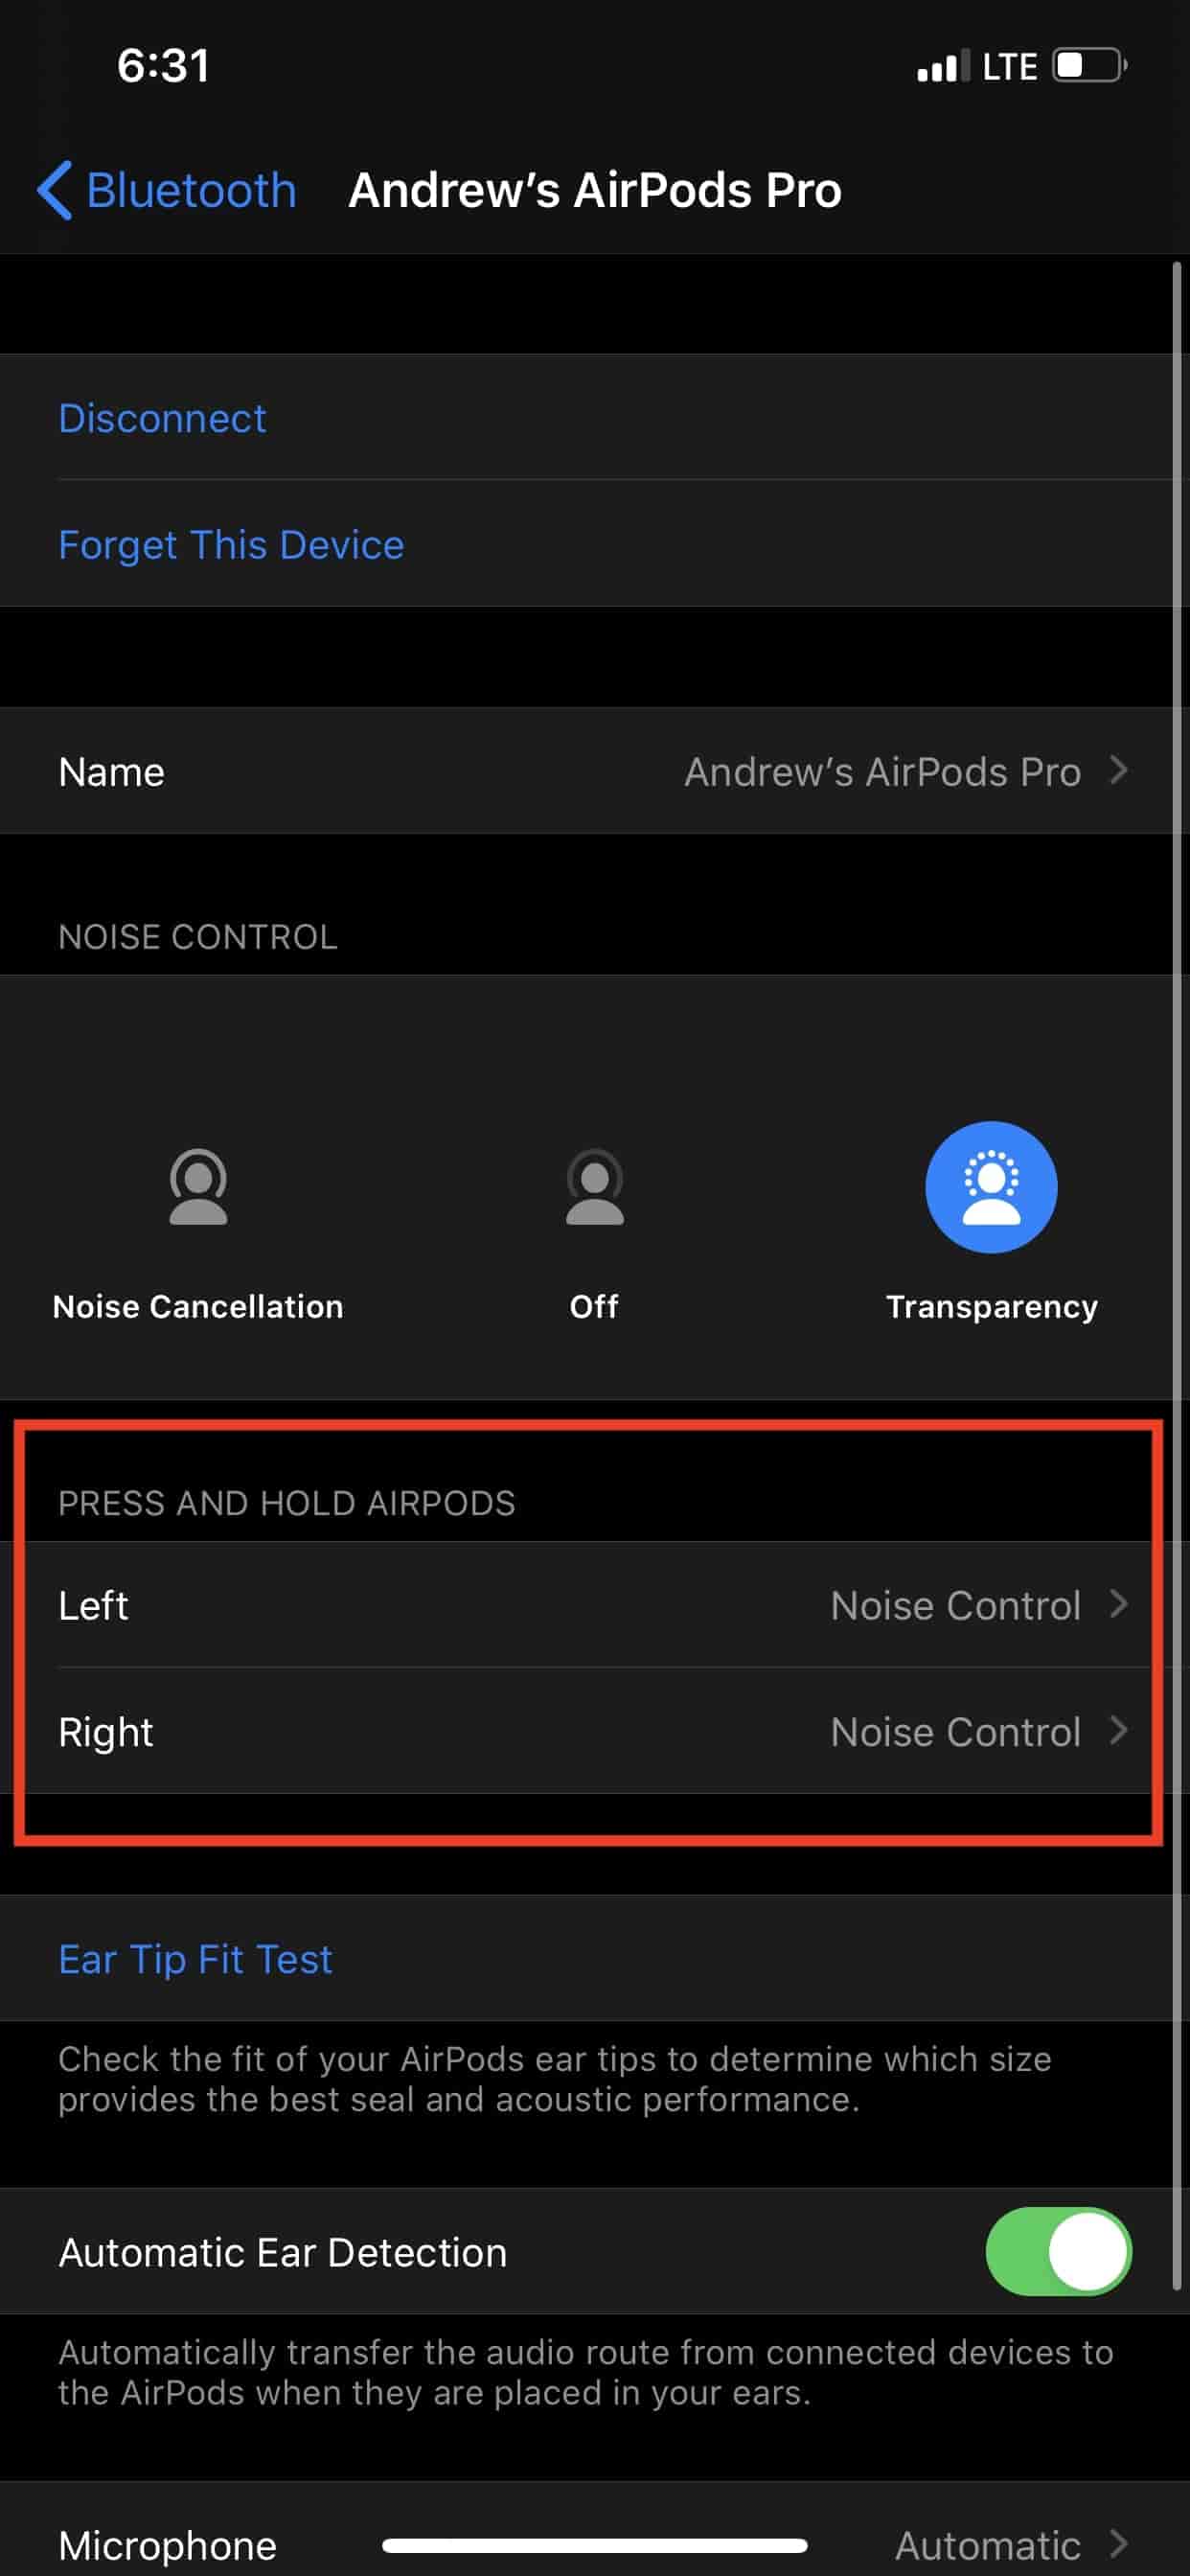 recruit straight ahead mattress AirPods Pro not working? Here are some tips and tricks - AppleToolBox